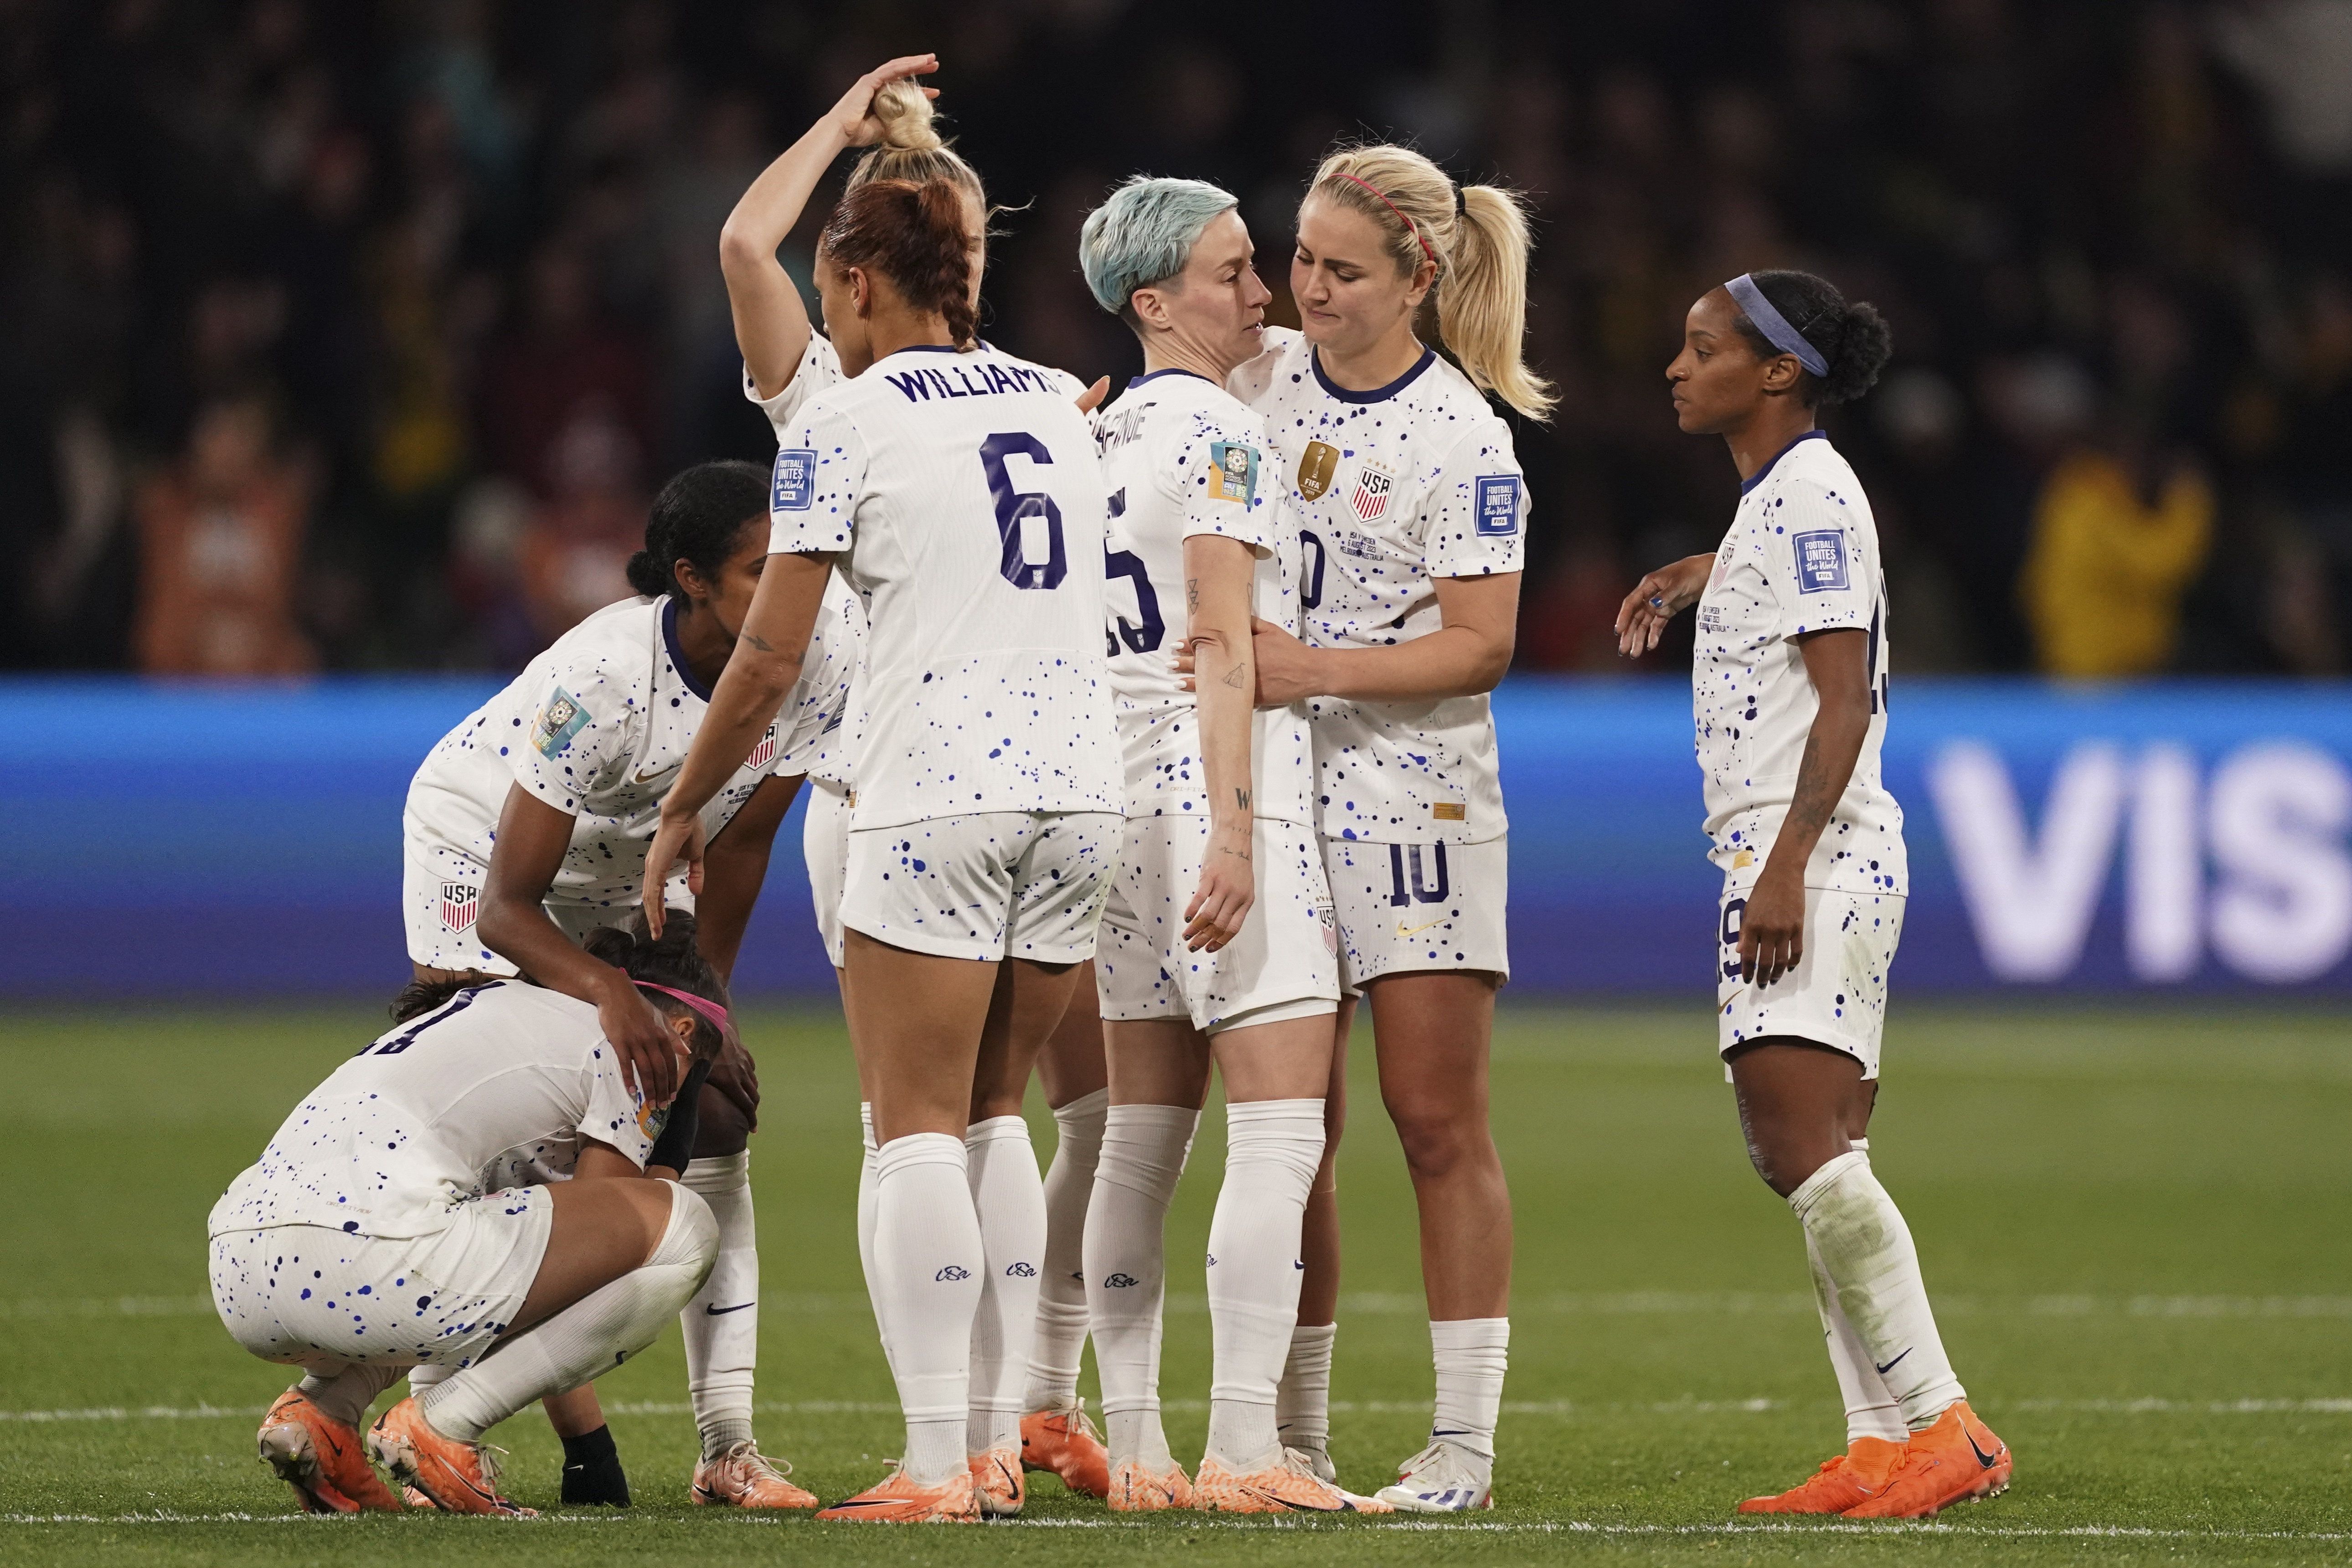 U.S. Women's Soccer Clinches Group at Rio Olympics 